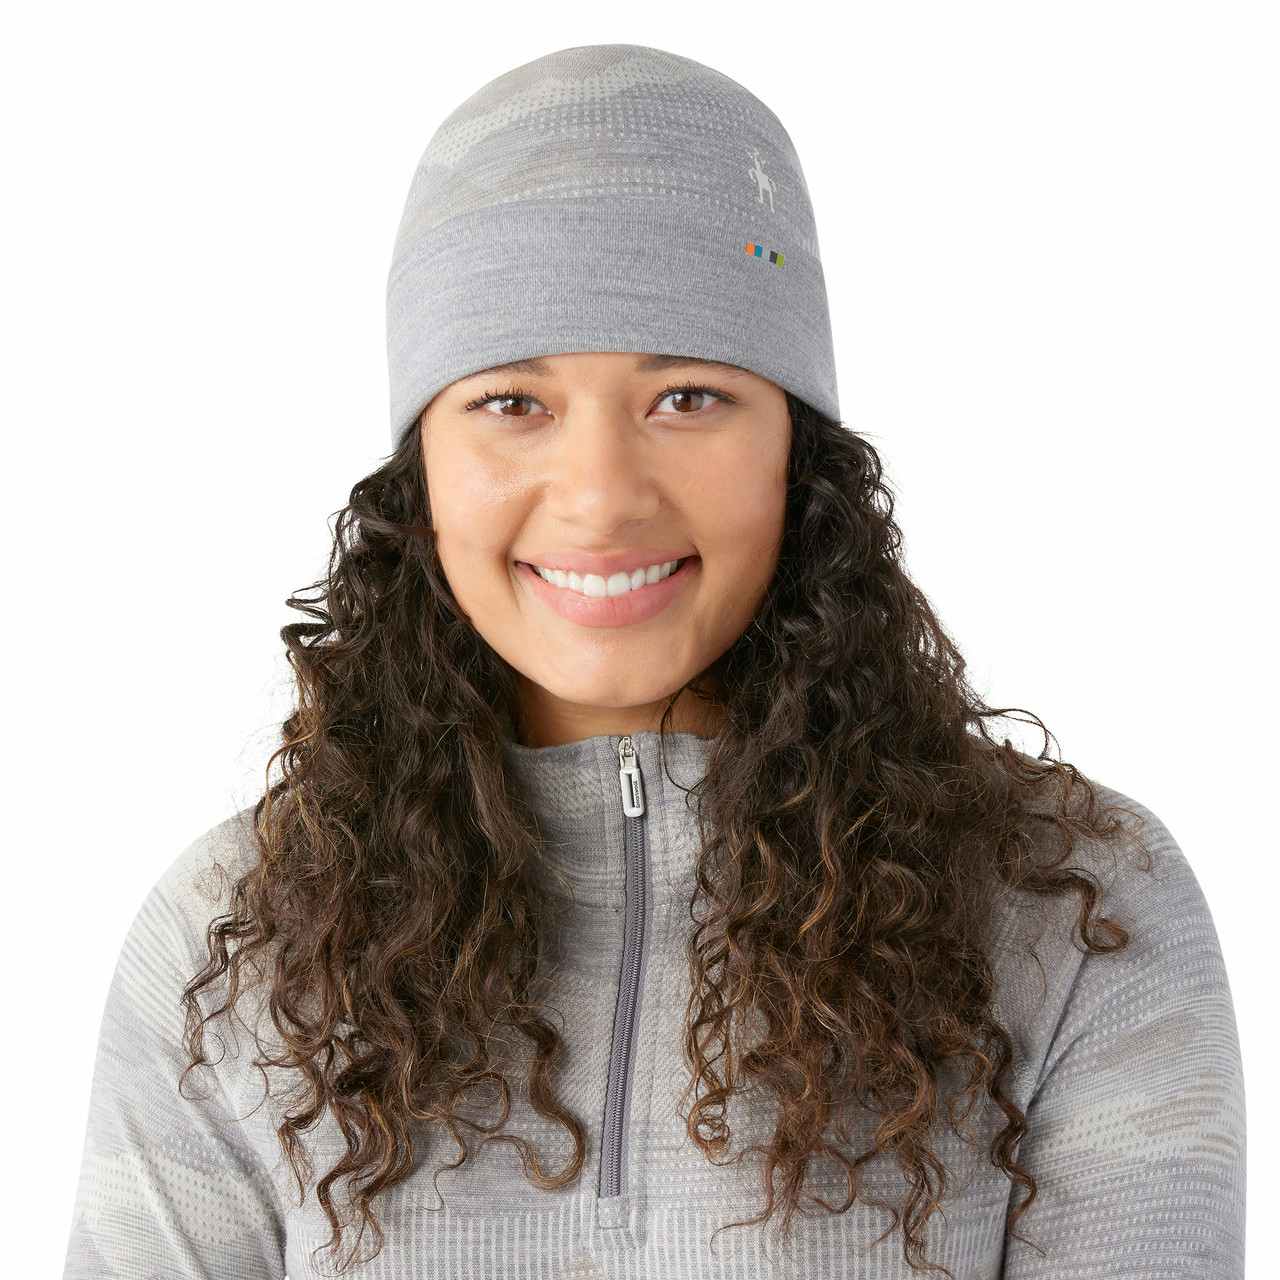 Thermal Merino Reversible Cuffed Beanie Light Gray Mountain Scape